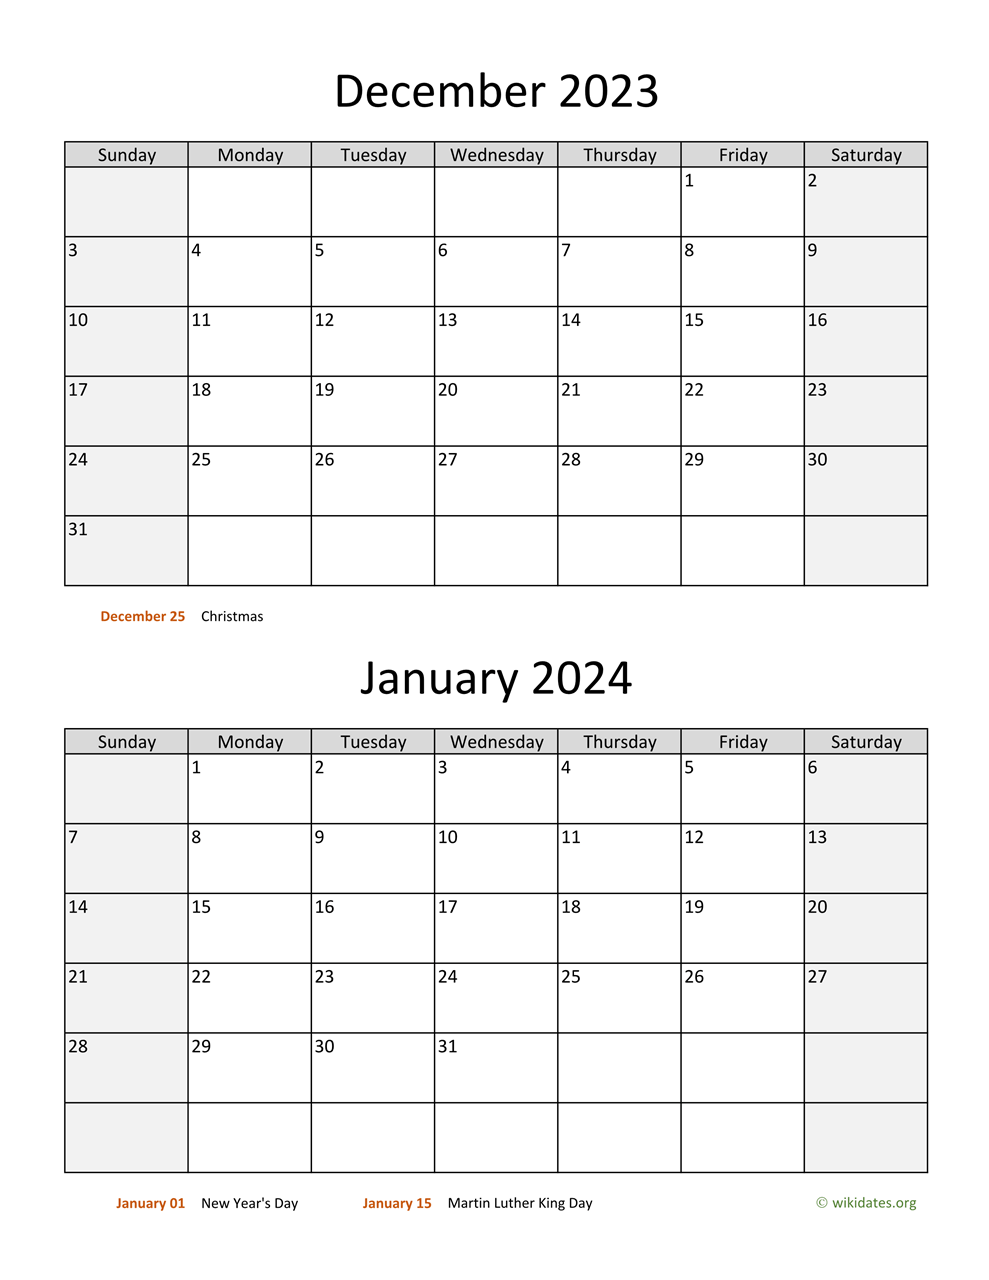 December 2023 And January 2024 Calendar | Wikidates for Printable Calendar December 2023 And January 2024